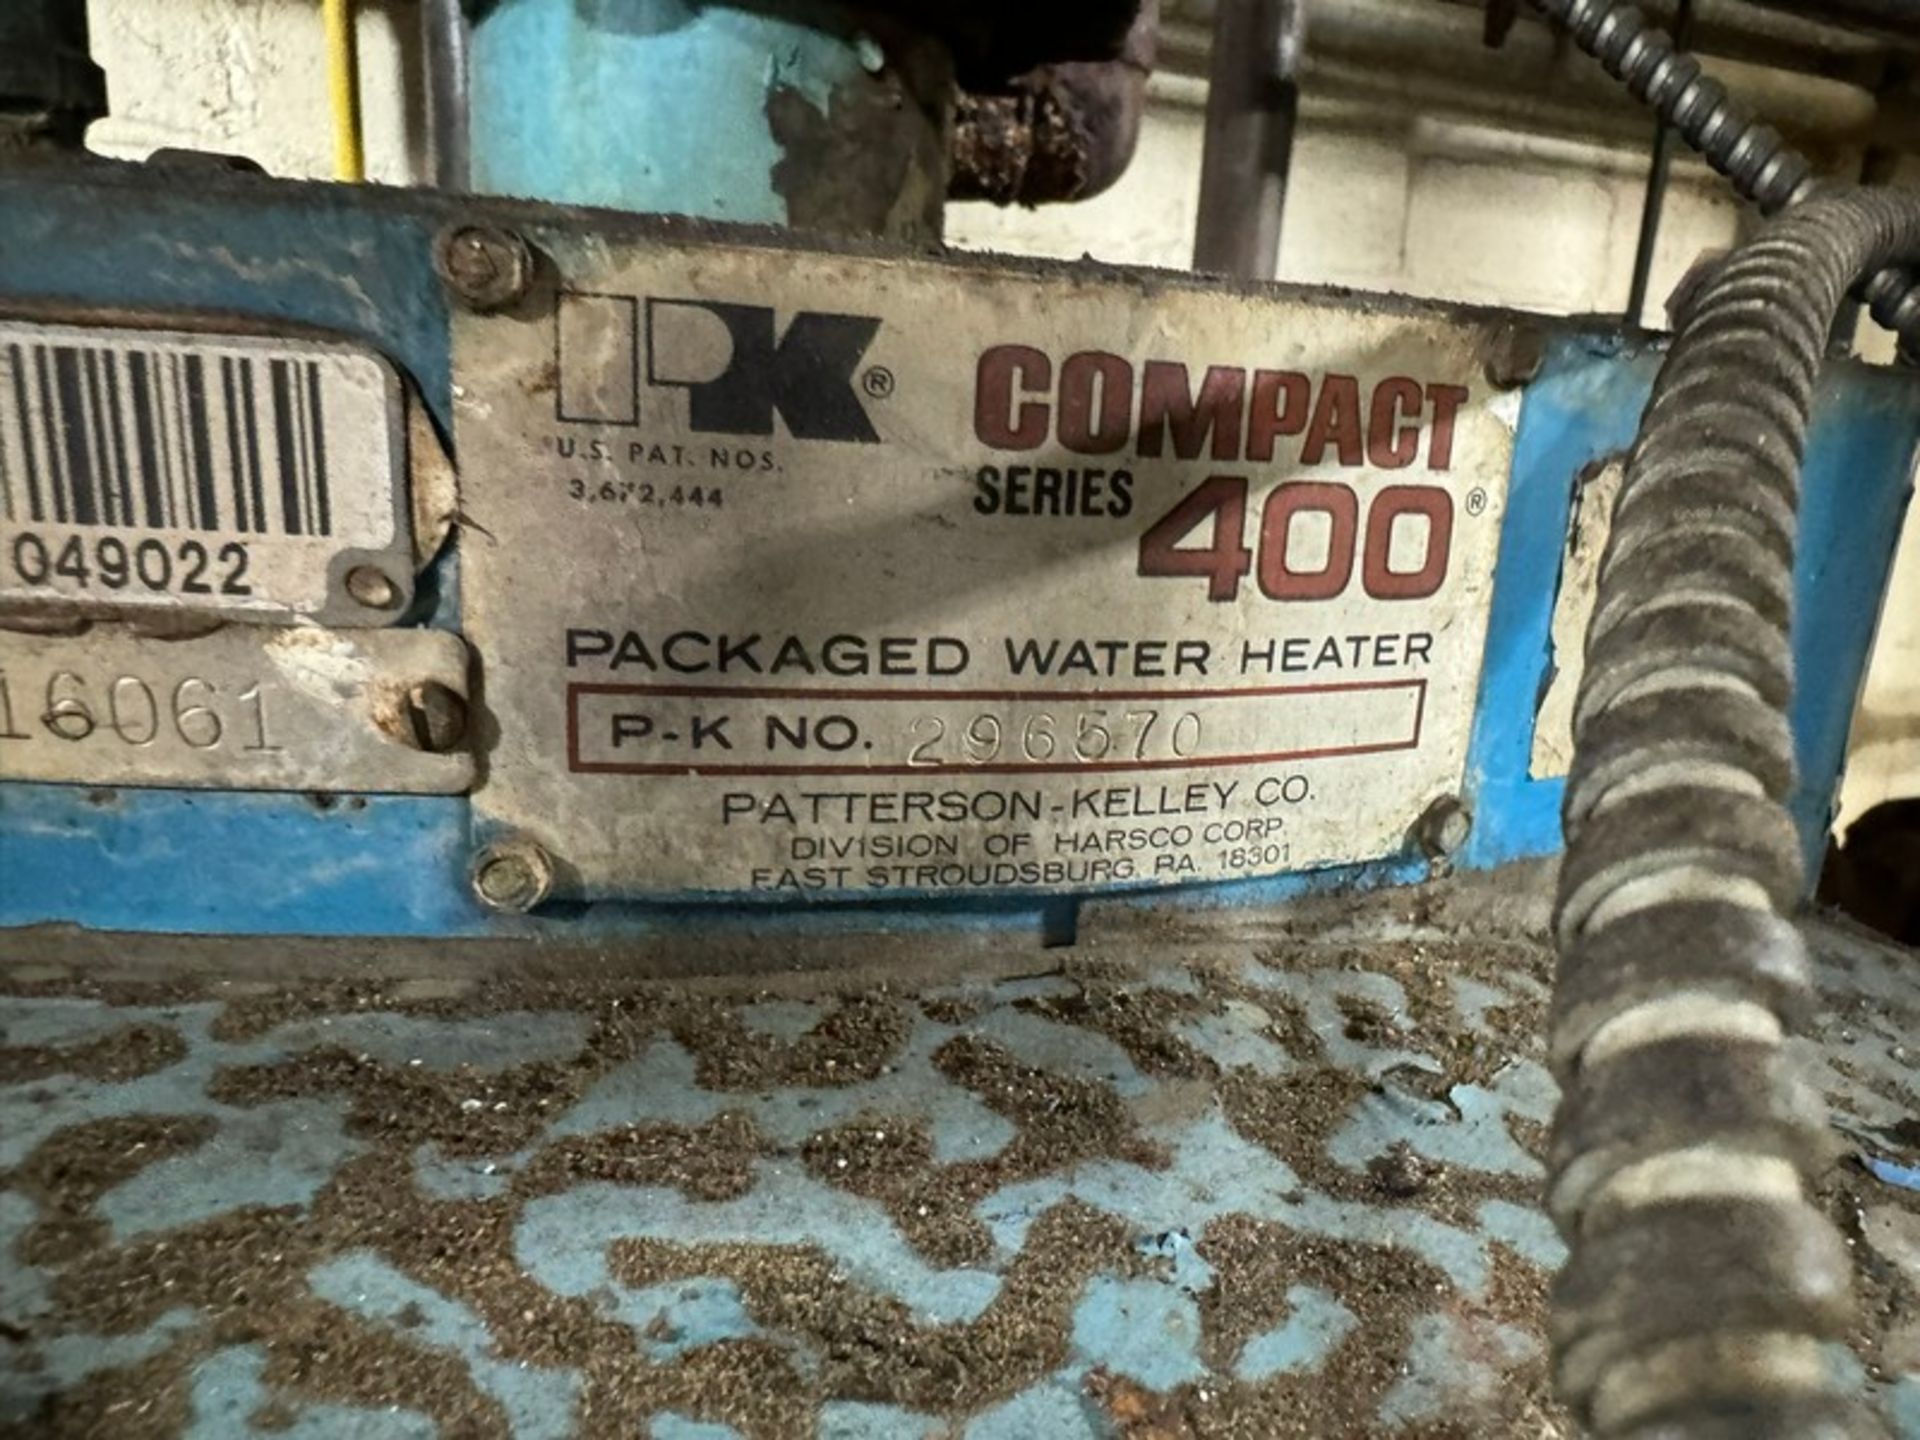 Patterson-Kelley Packaged Water Heater, PK. No. 296580, Compact Series 400 (N: 049022)(LOCATED IN - Image 3 of 3